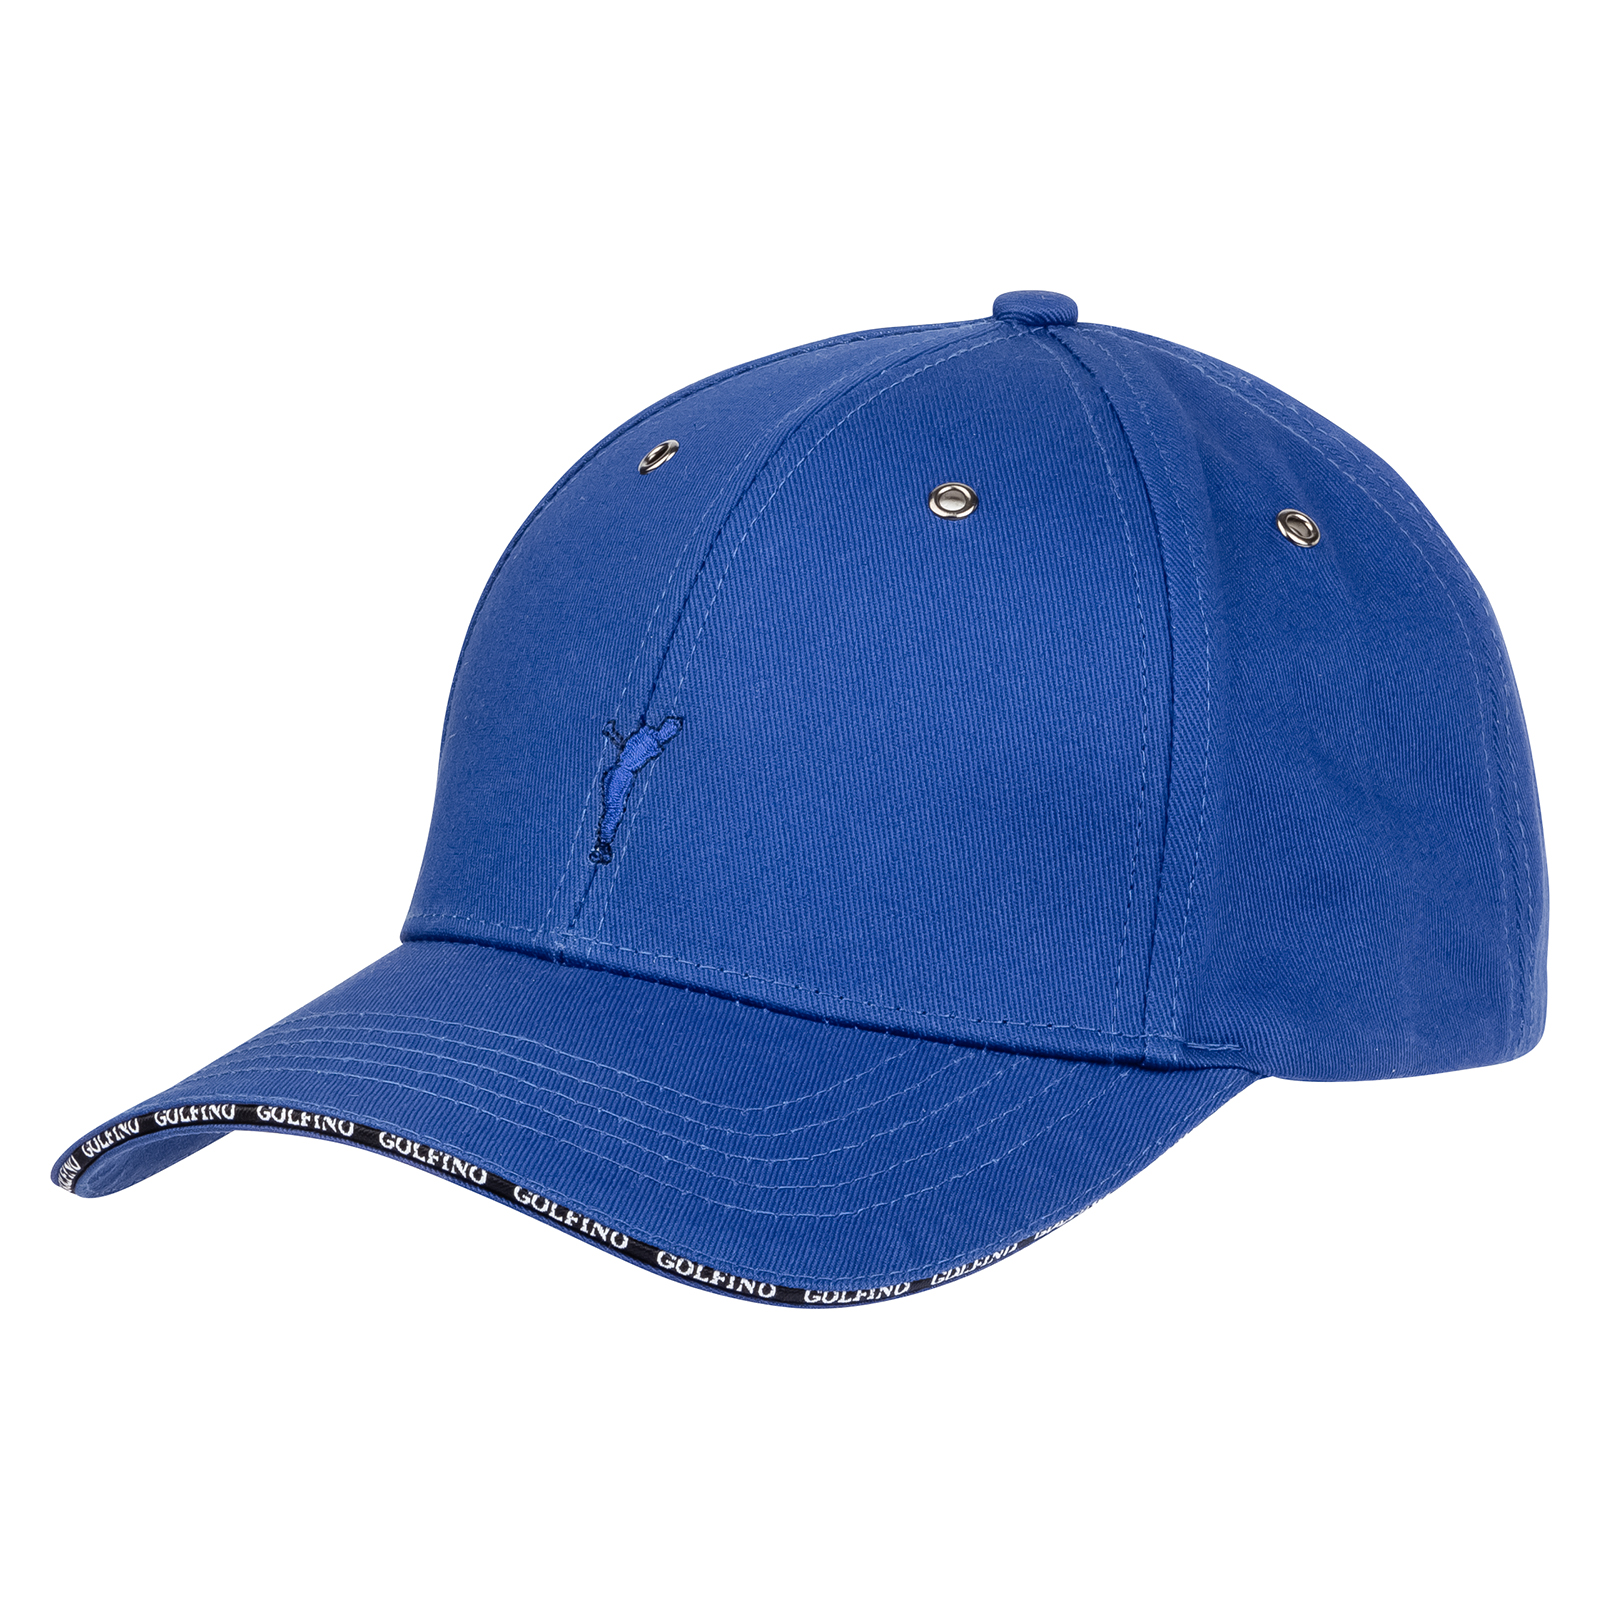 Men's golf cap made from cotton in adjustable one-size